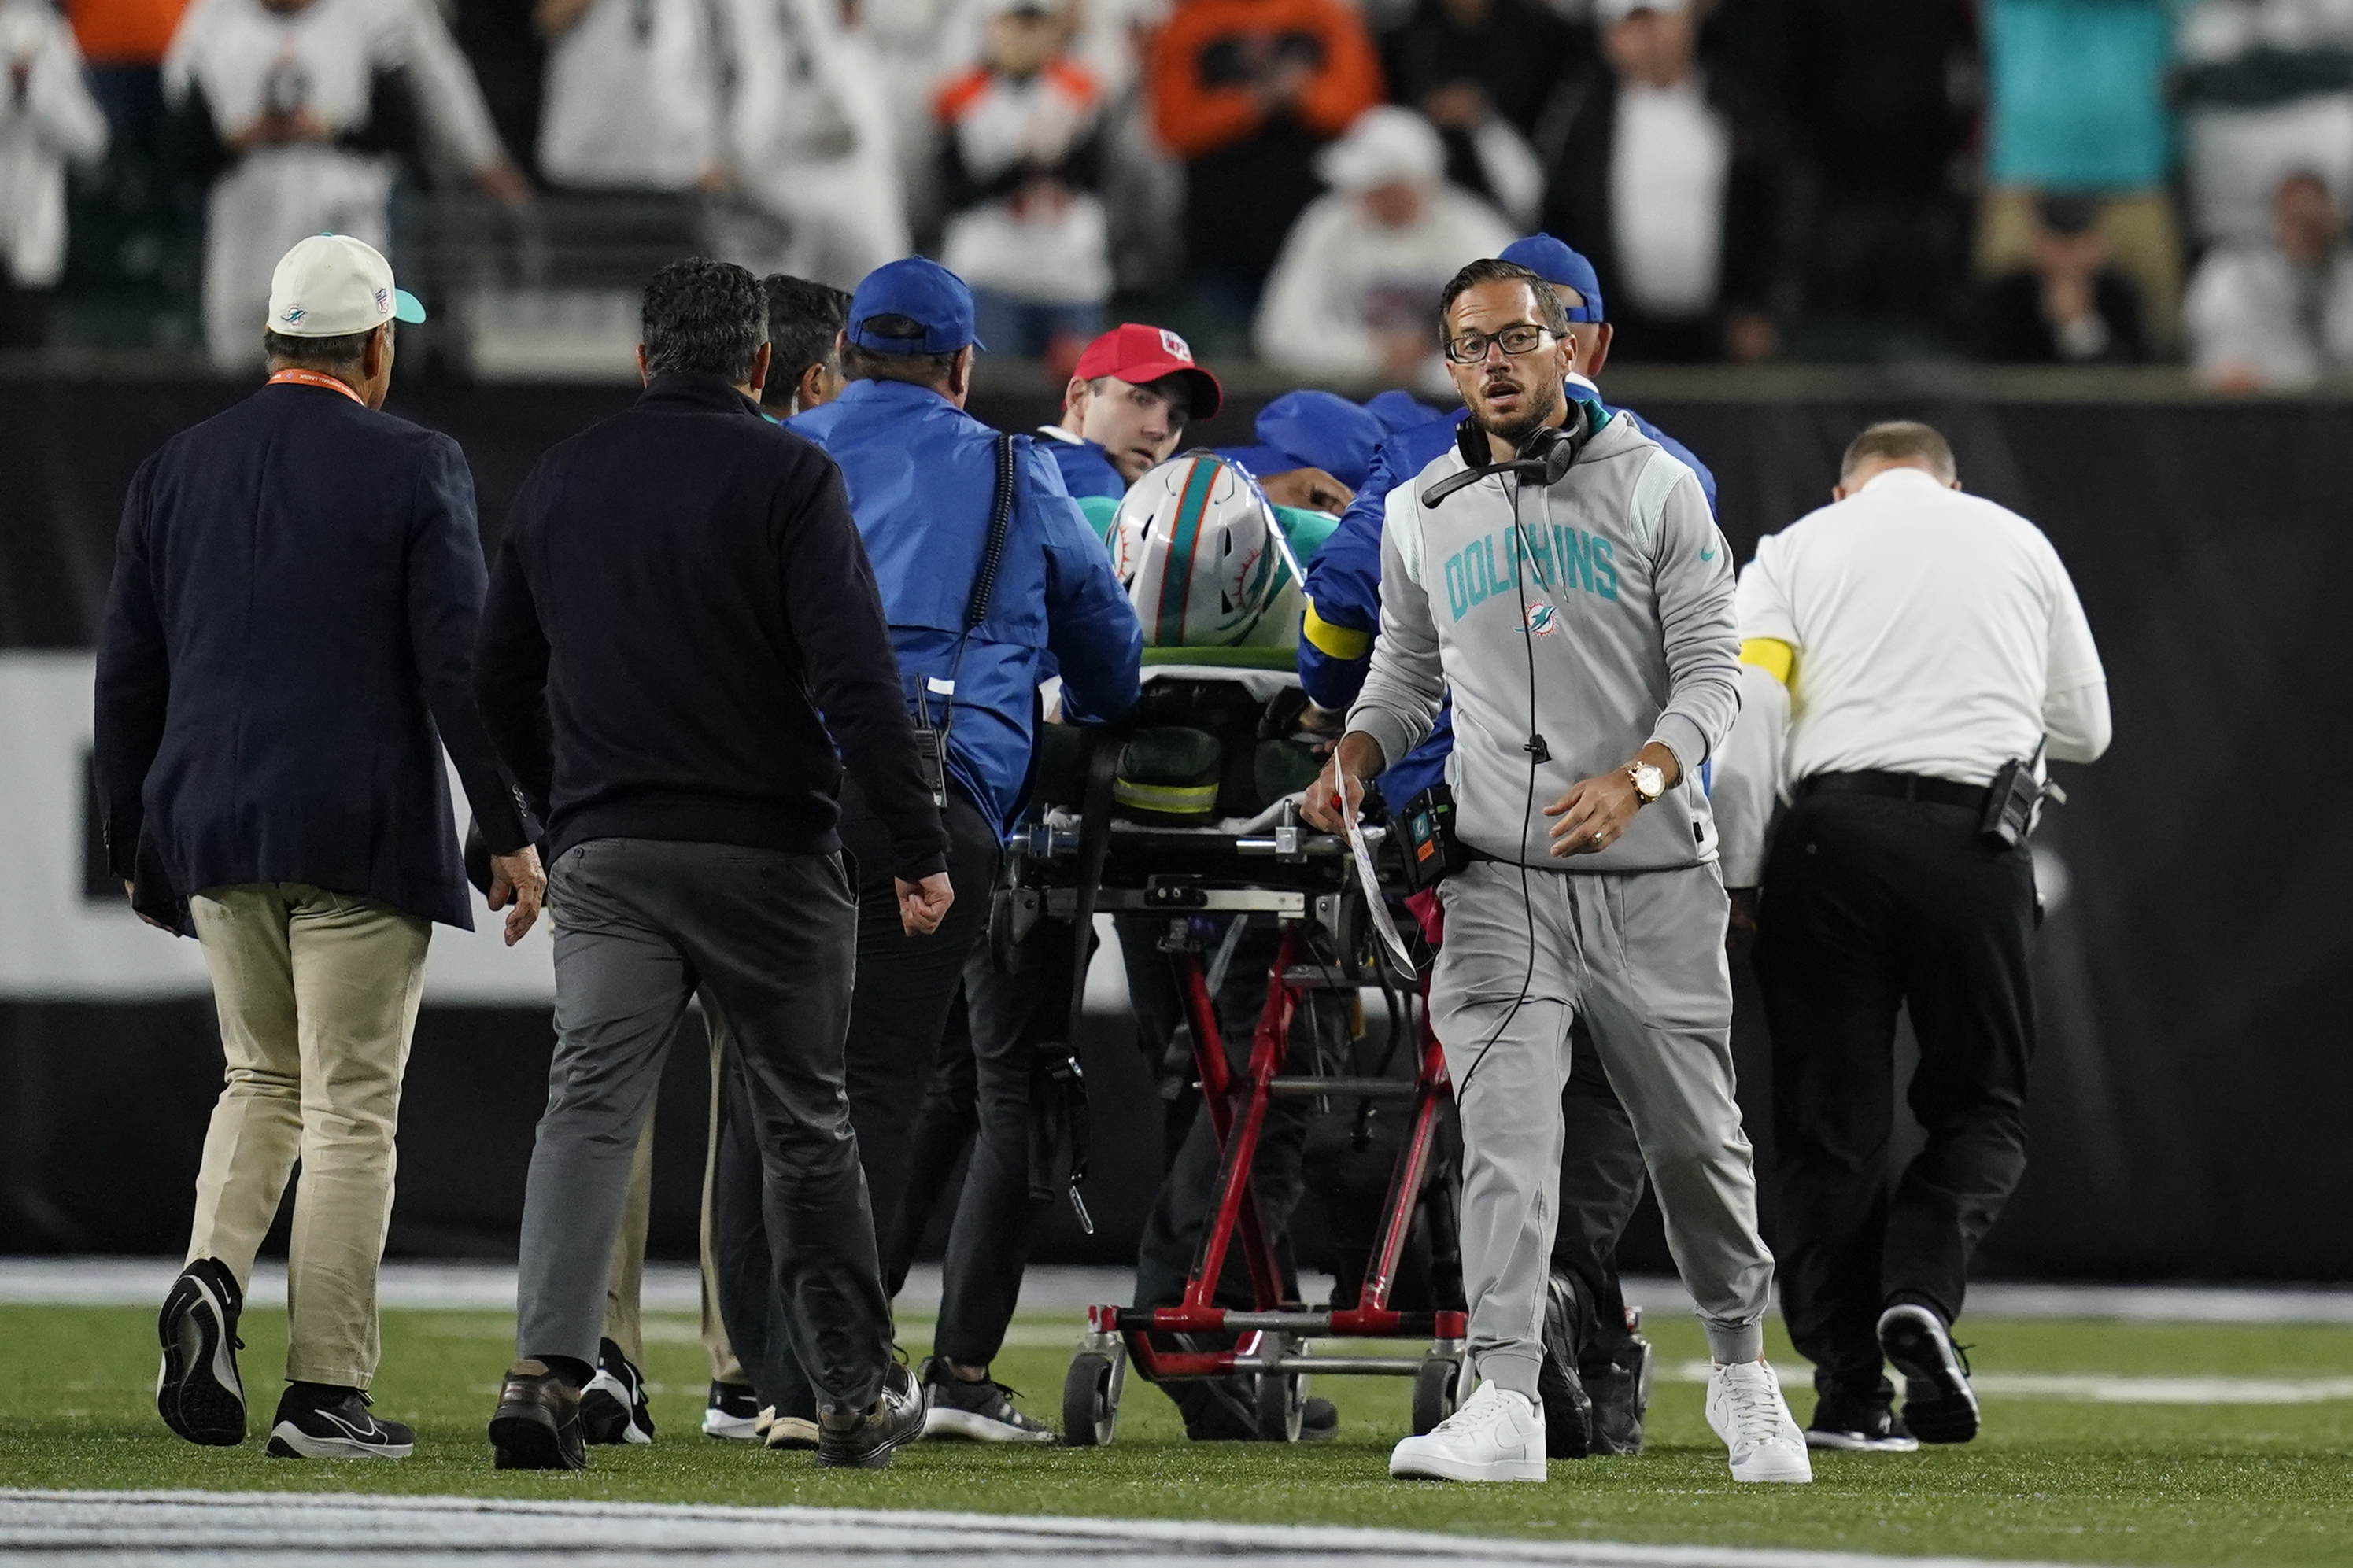 Dolphins QB Tua Tagovailoa discharged from hospital Thursday after